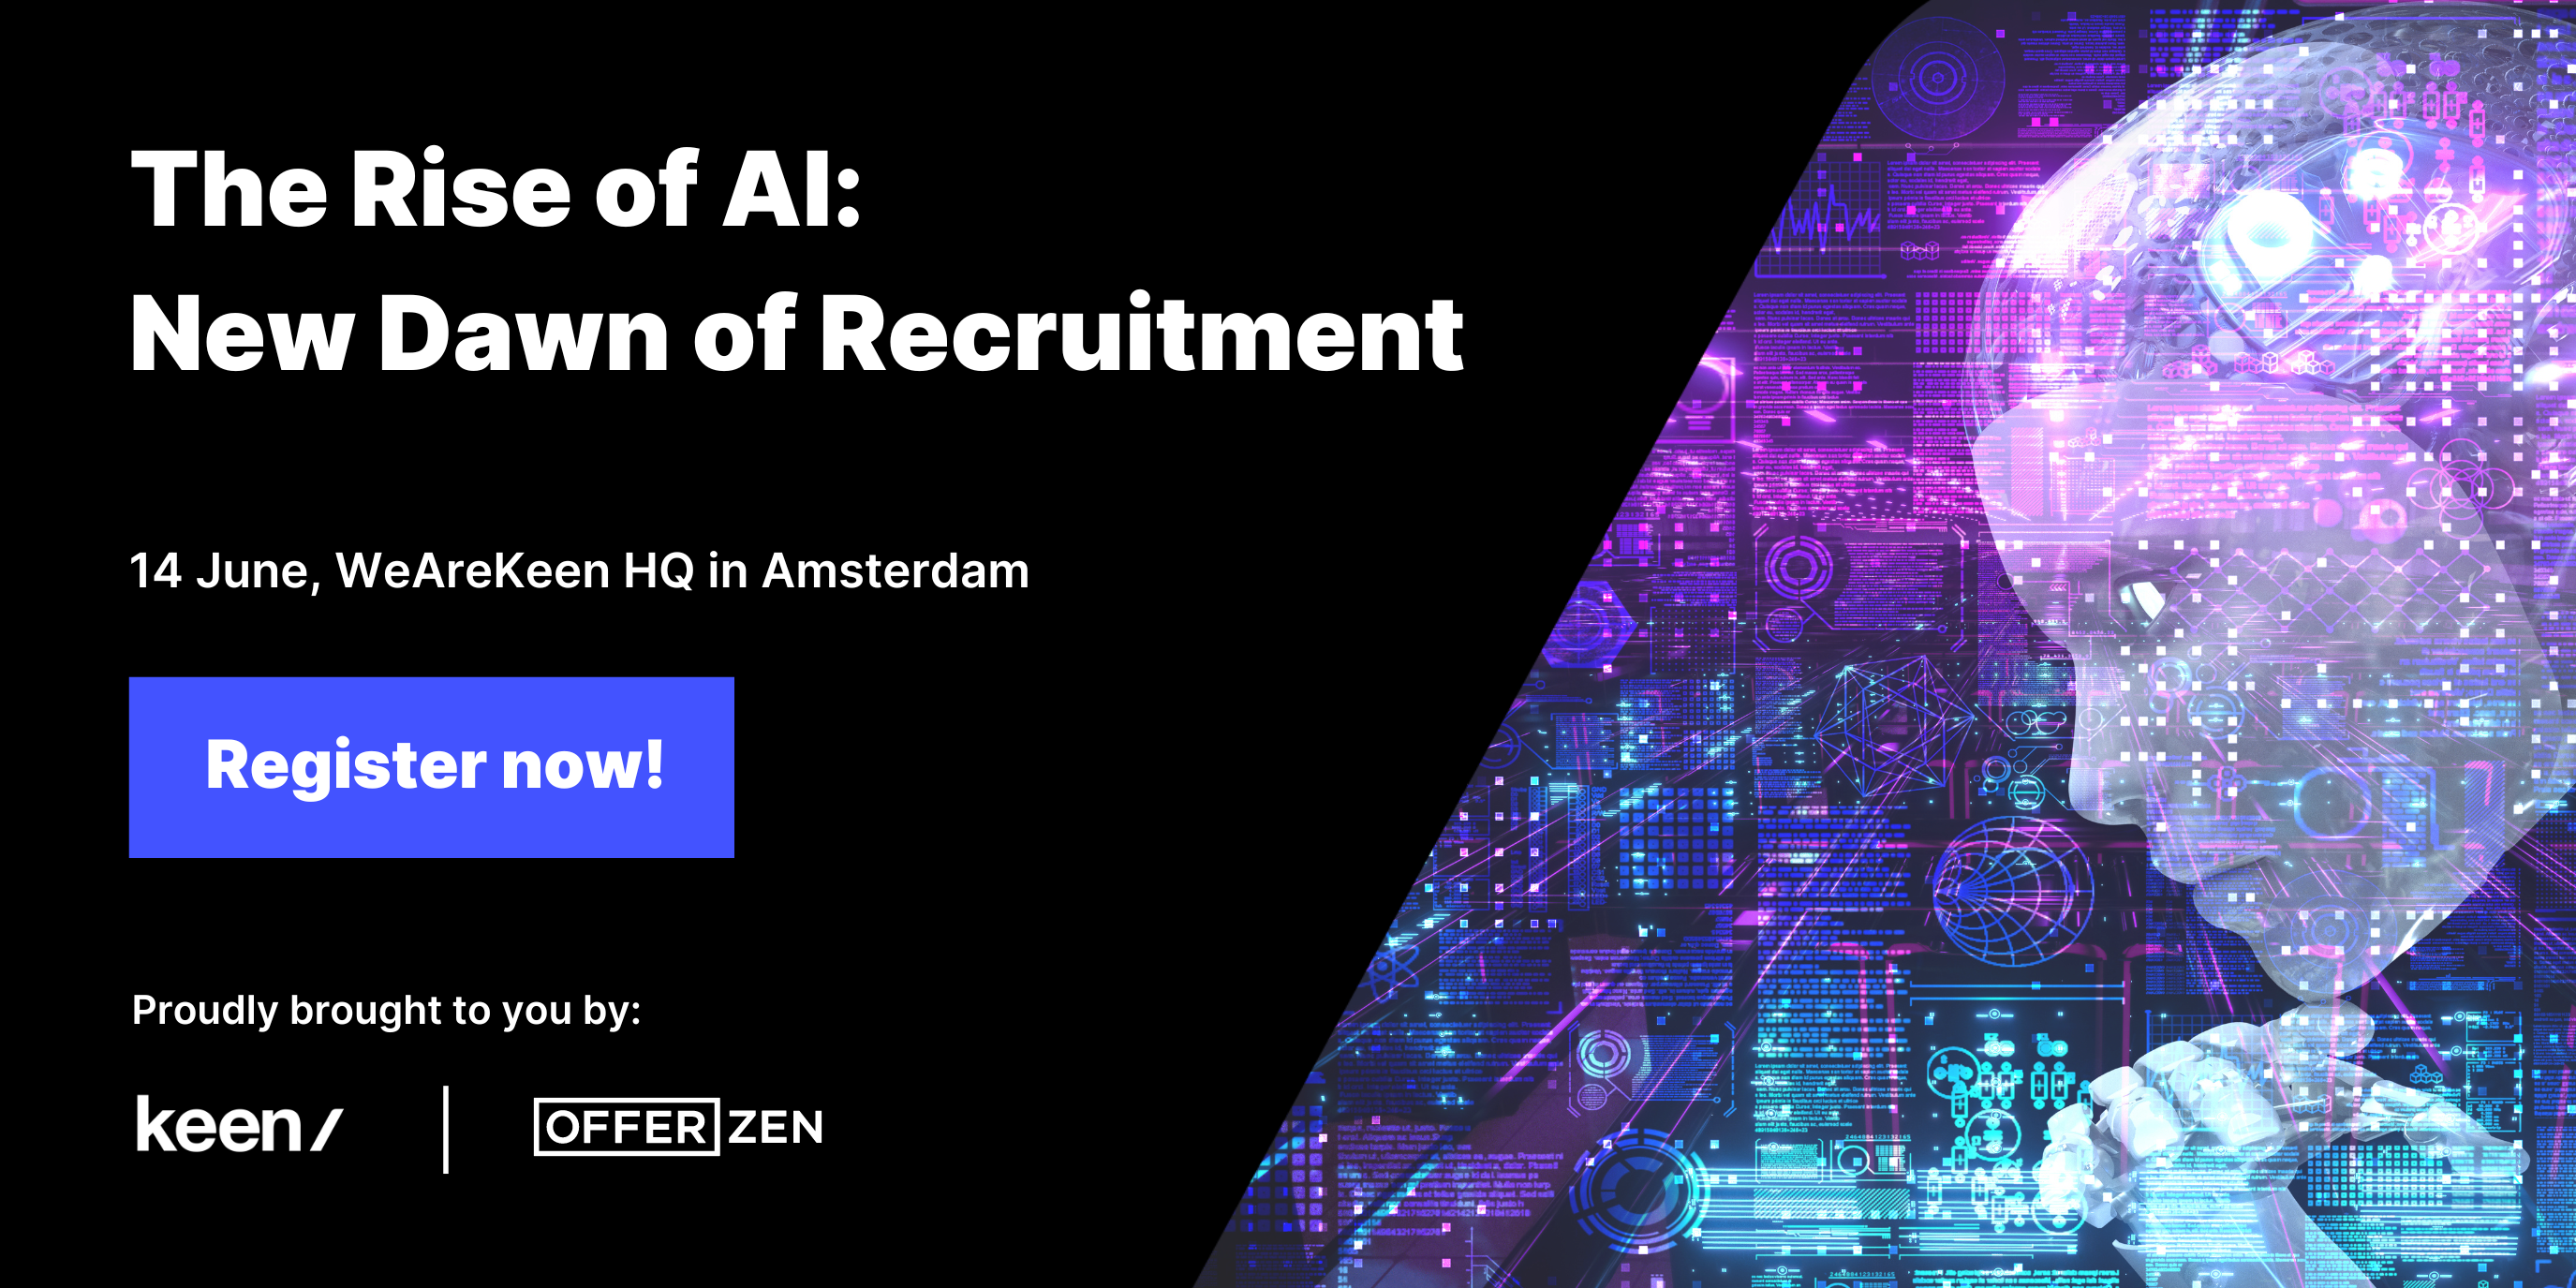 The Rise of AI: New Dawn of Recruitment